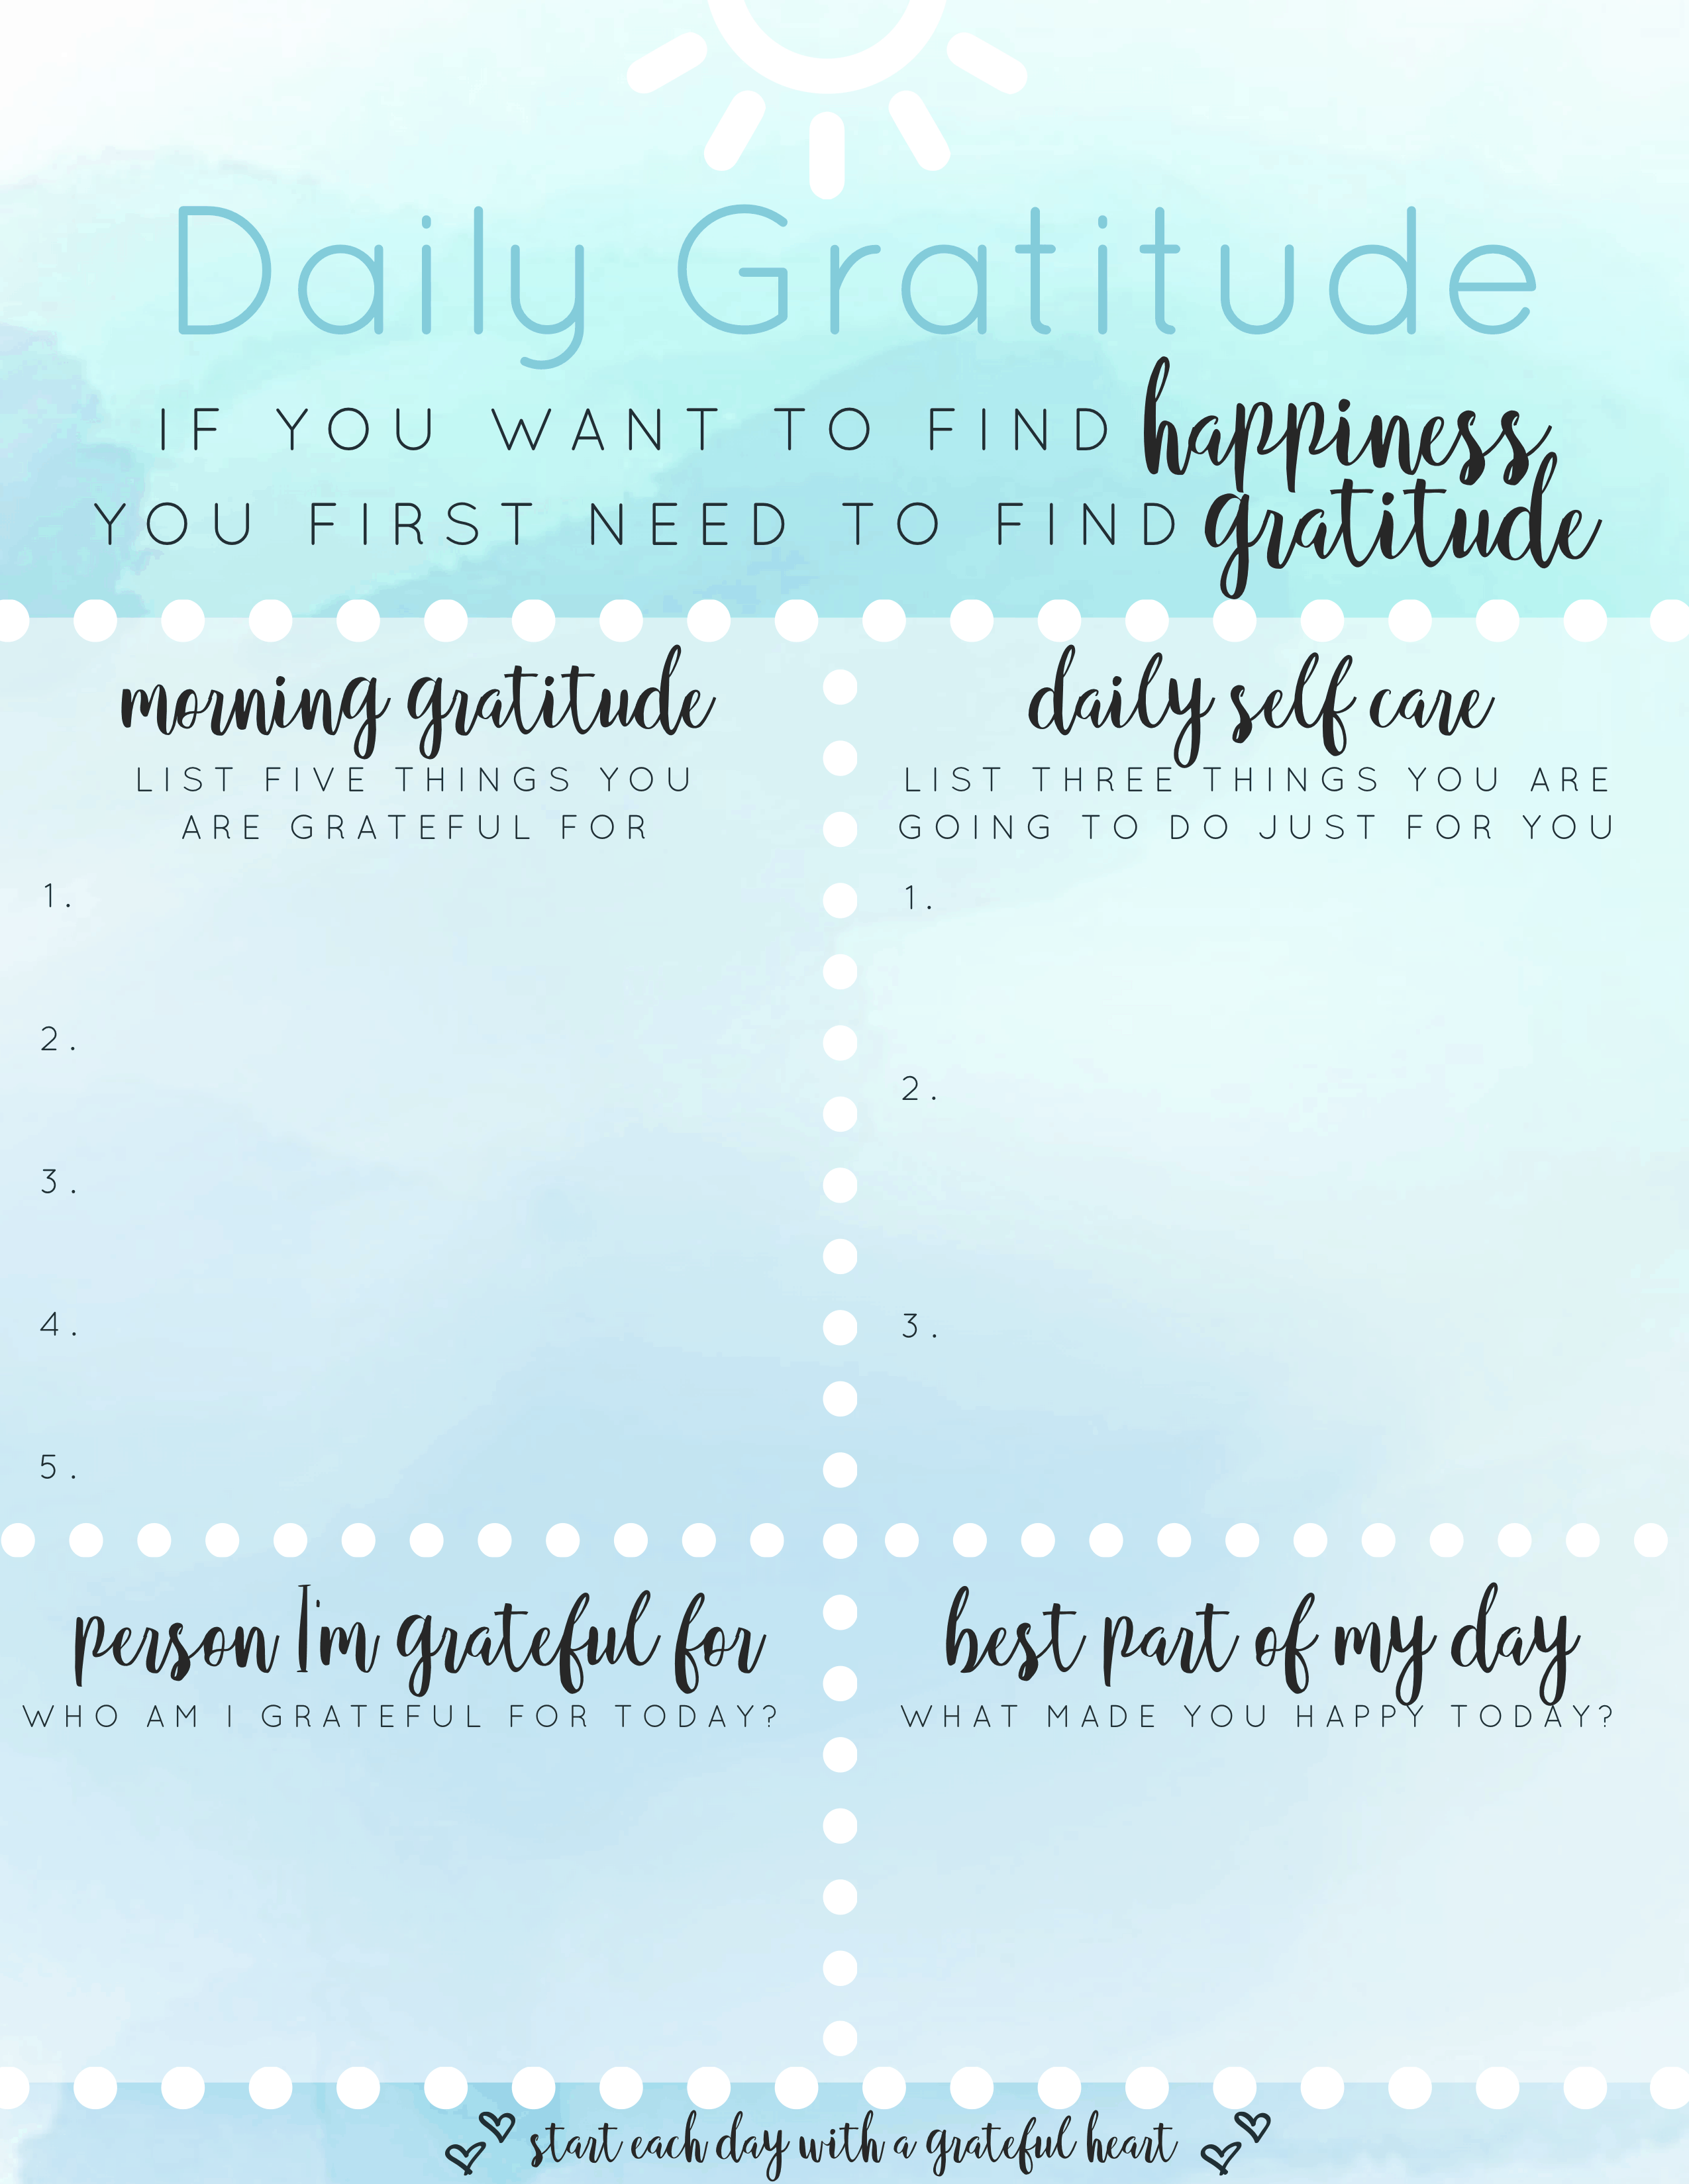 Daily Gratitude Challenge and Free Printable Clutterbug